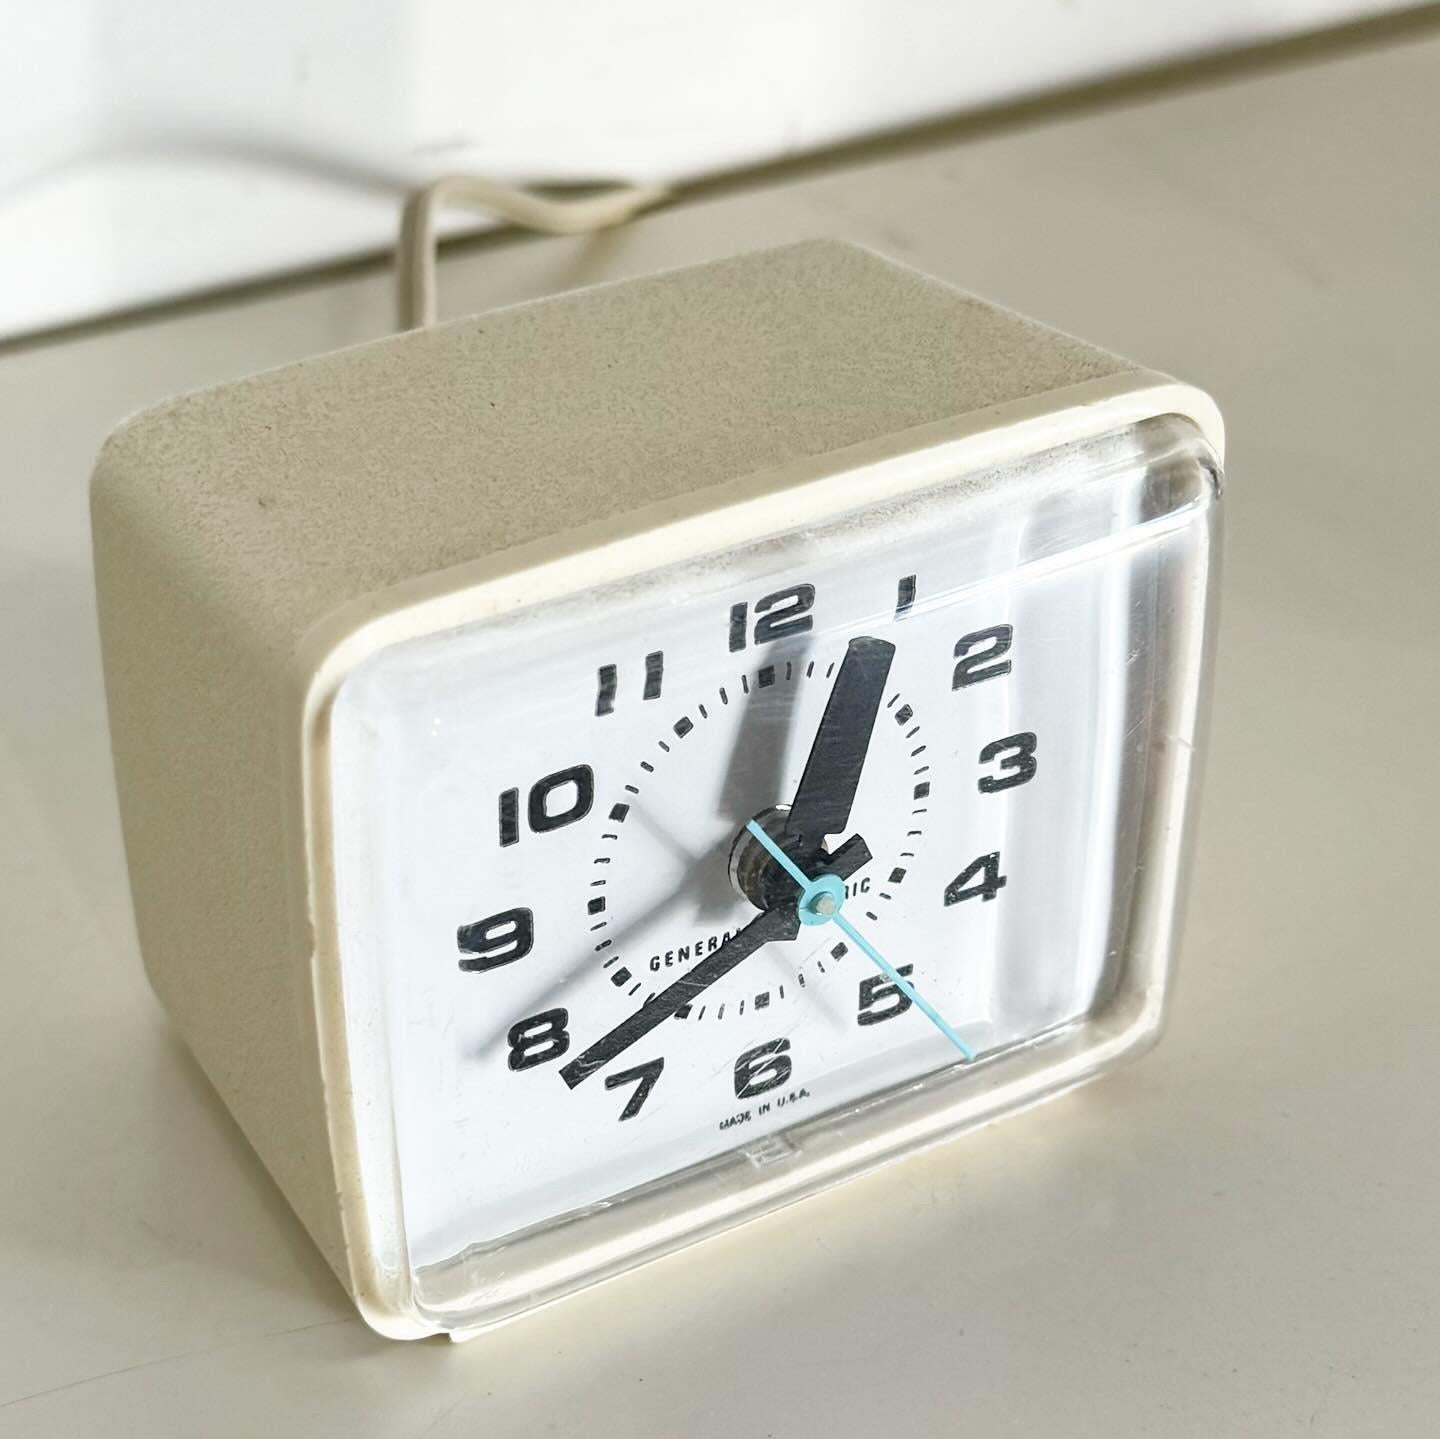 Revel in the nostalgia with the Vintage GE Teal Alarm Clock, model 7369, in teal blue. This mid-century modern gem combines bold design with functionality, featuring a vibrant teal casing and a clear dial for easy reading. Perfect for adding a pop